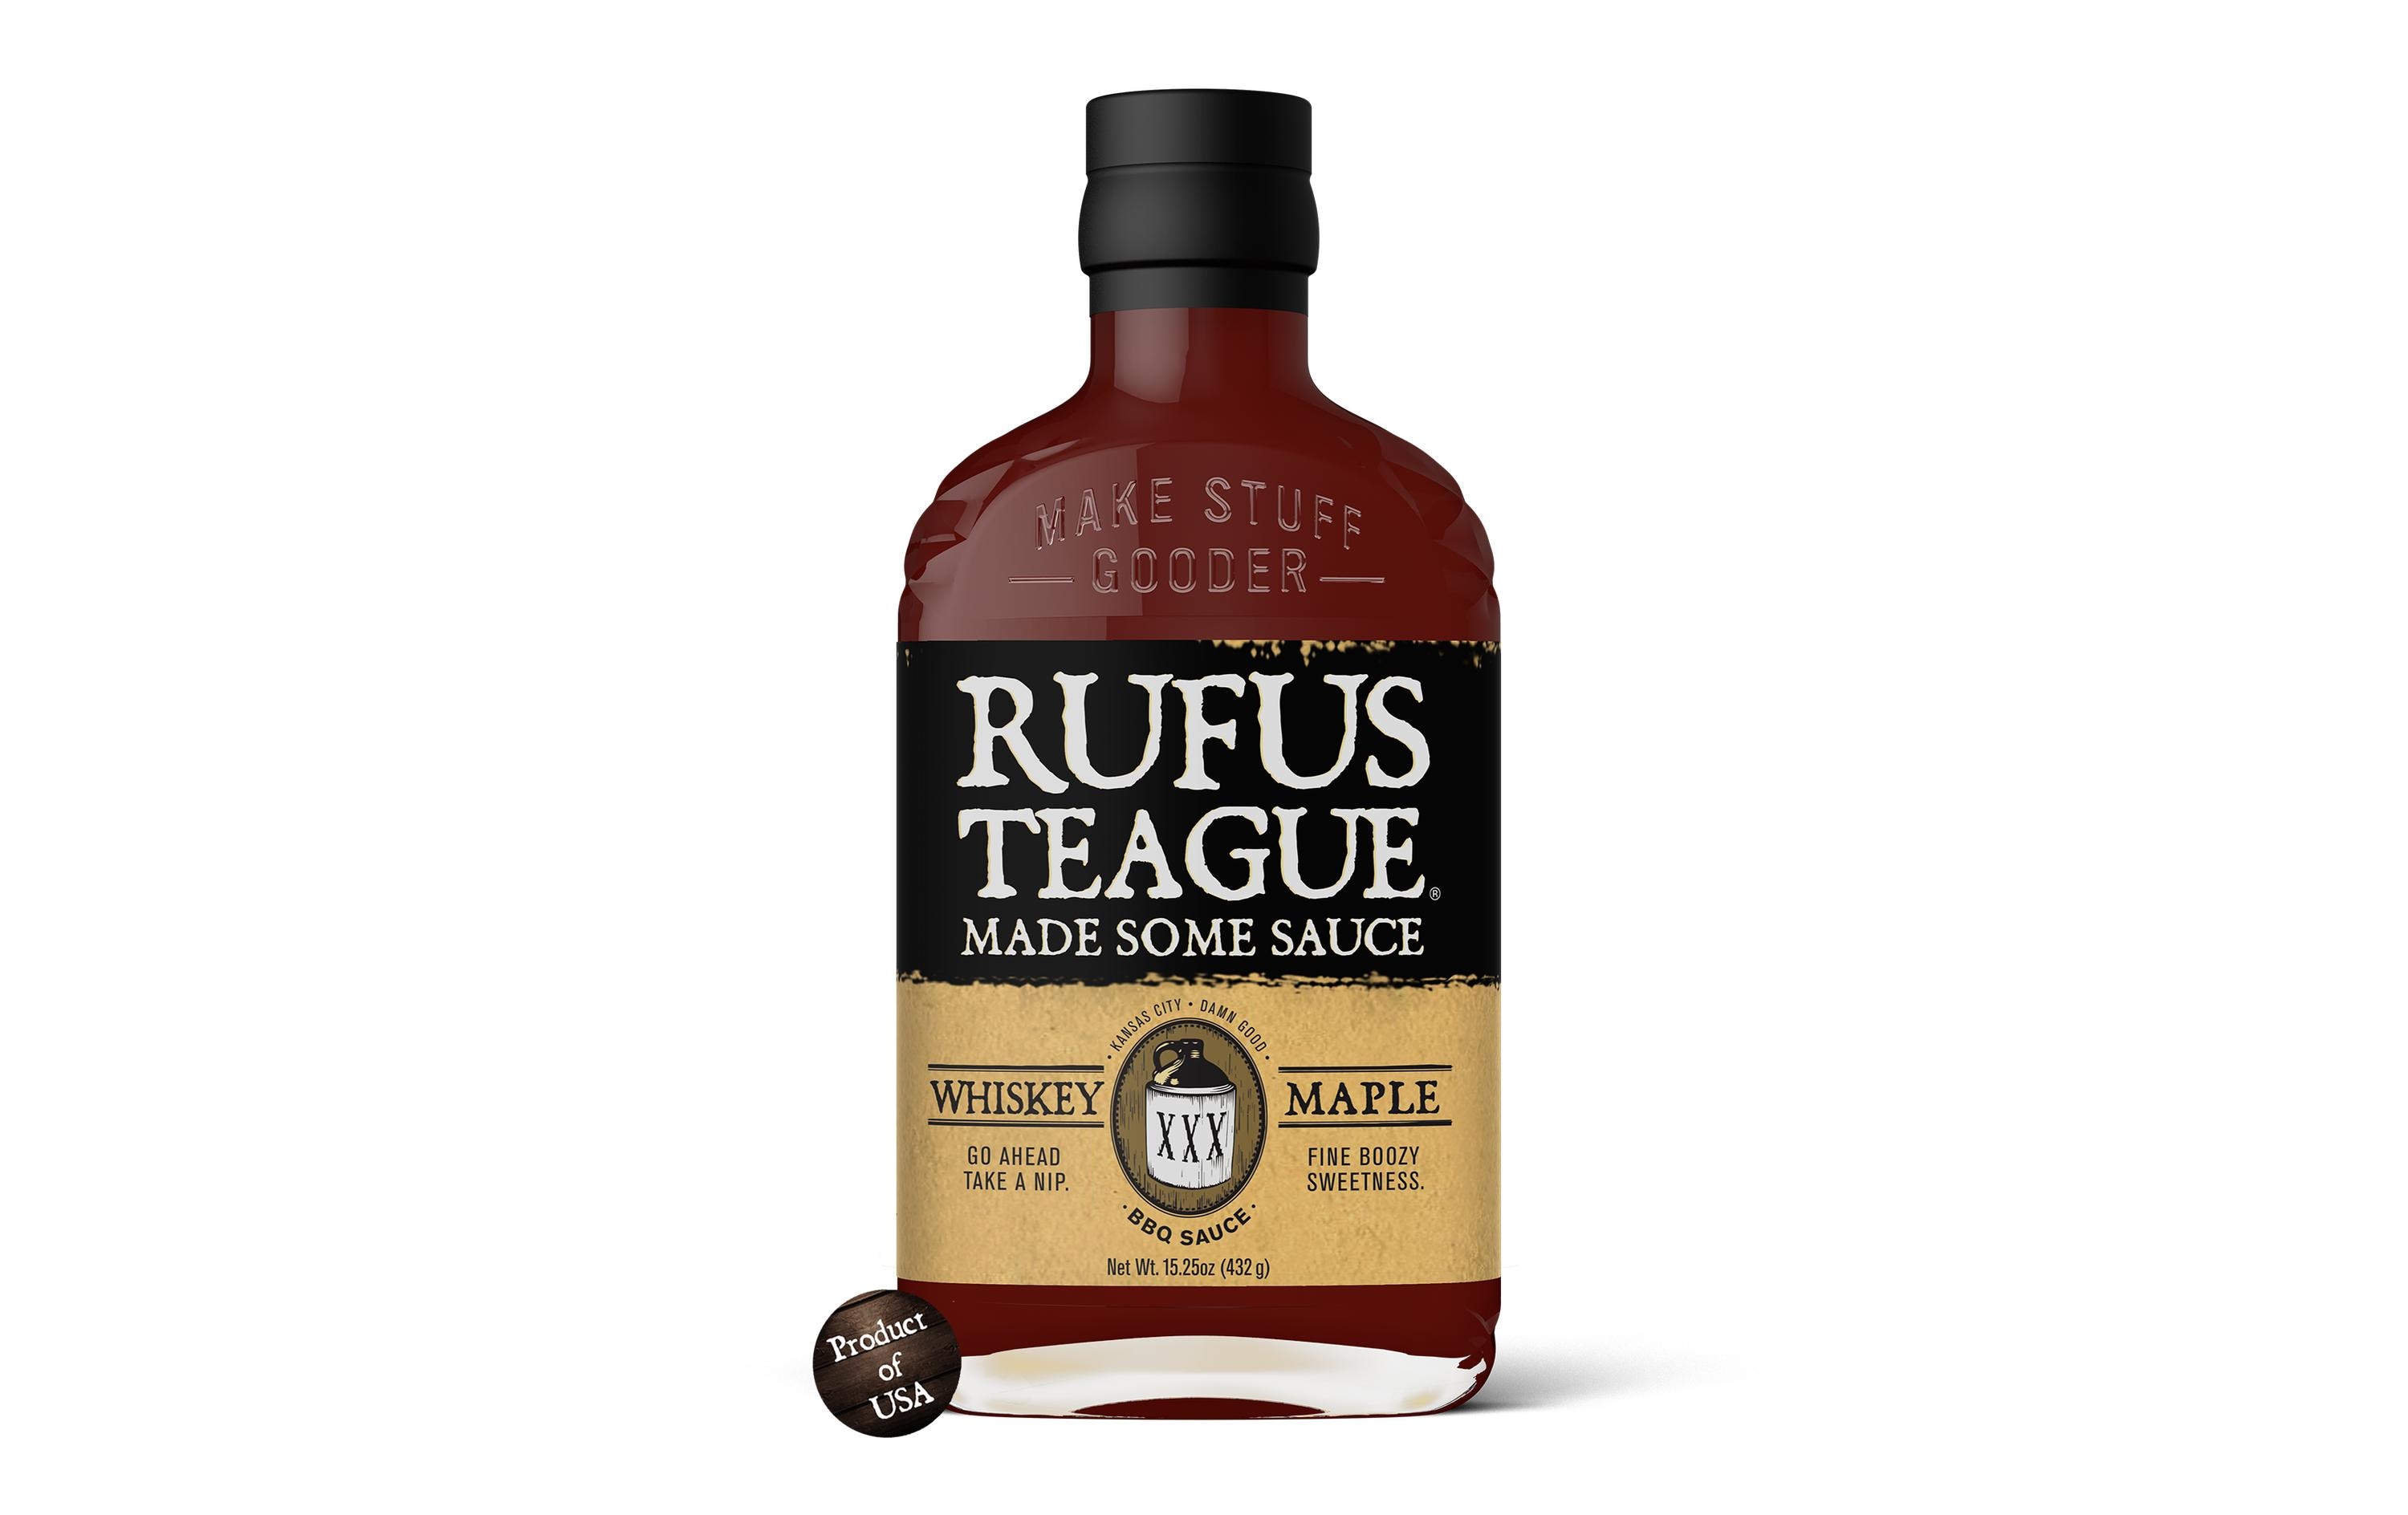 Rufus Teague Barbecue Sauce Whiskey Maple 432 g